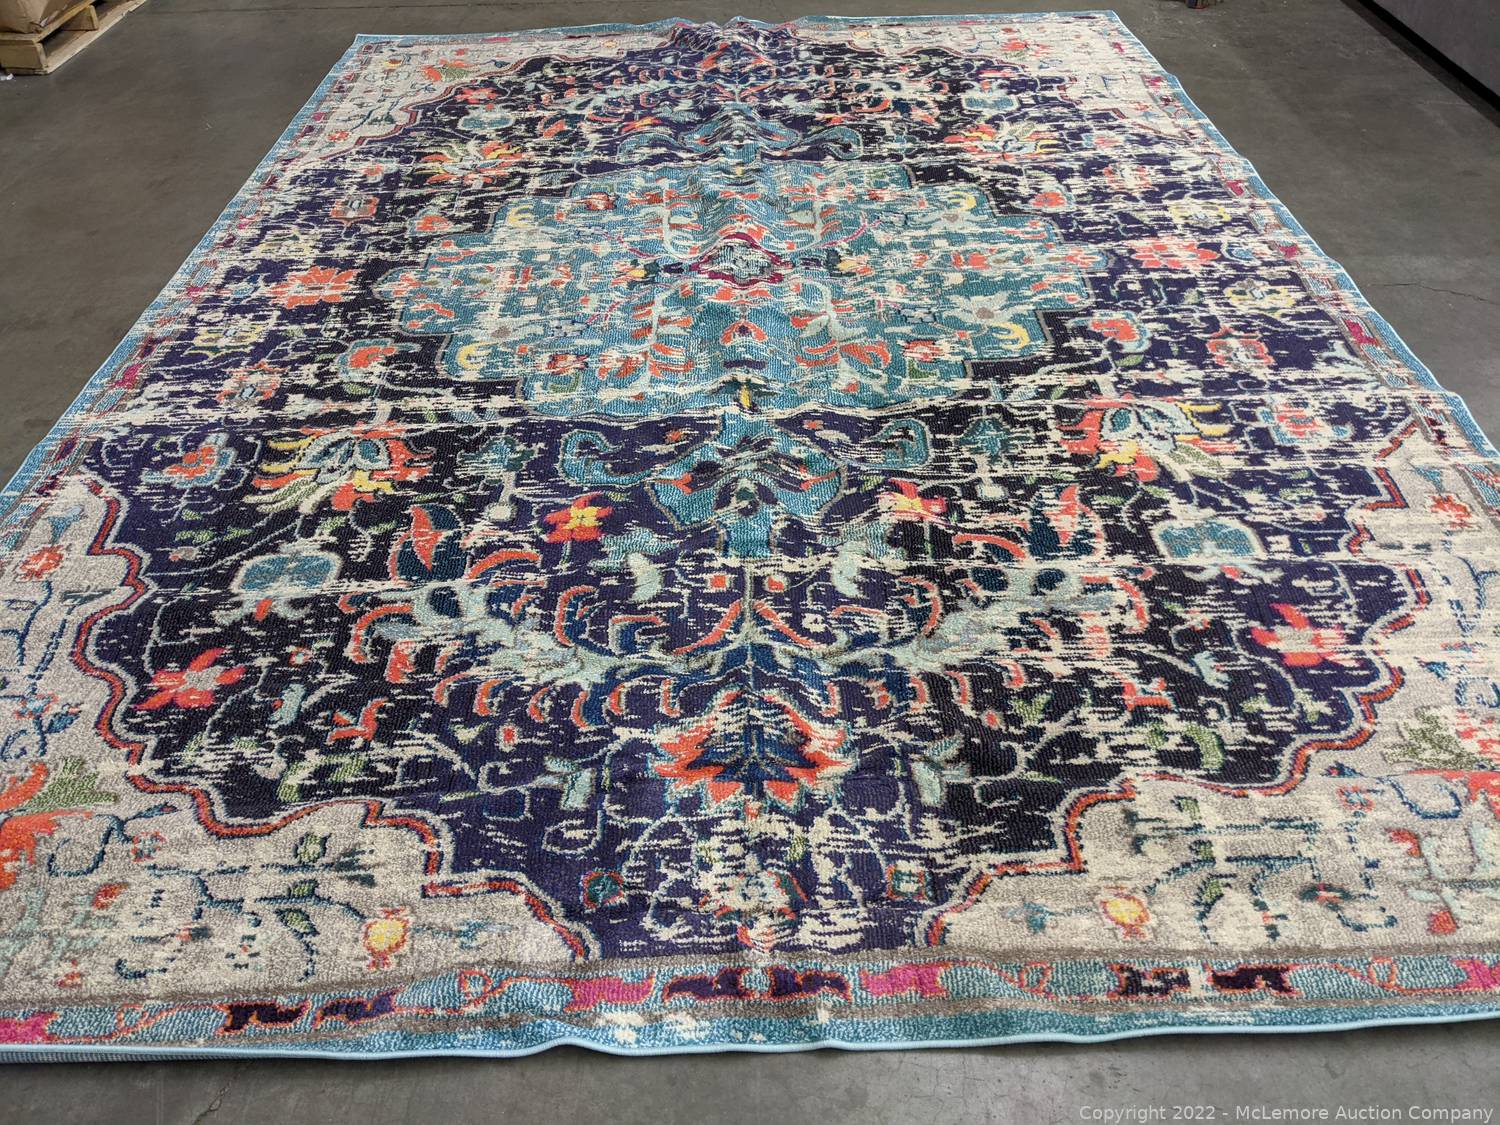 Teal SAFAVIEH Madison Collection MAD447Z Boho Chic Medallion Distressed Non-Shedding Living Room Bedroom Dining Home Office Area Rug 9' x 12' Black